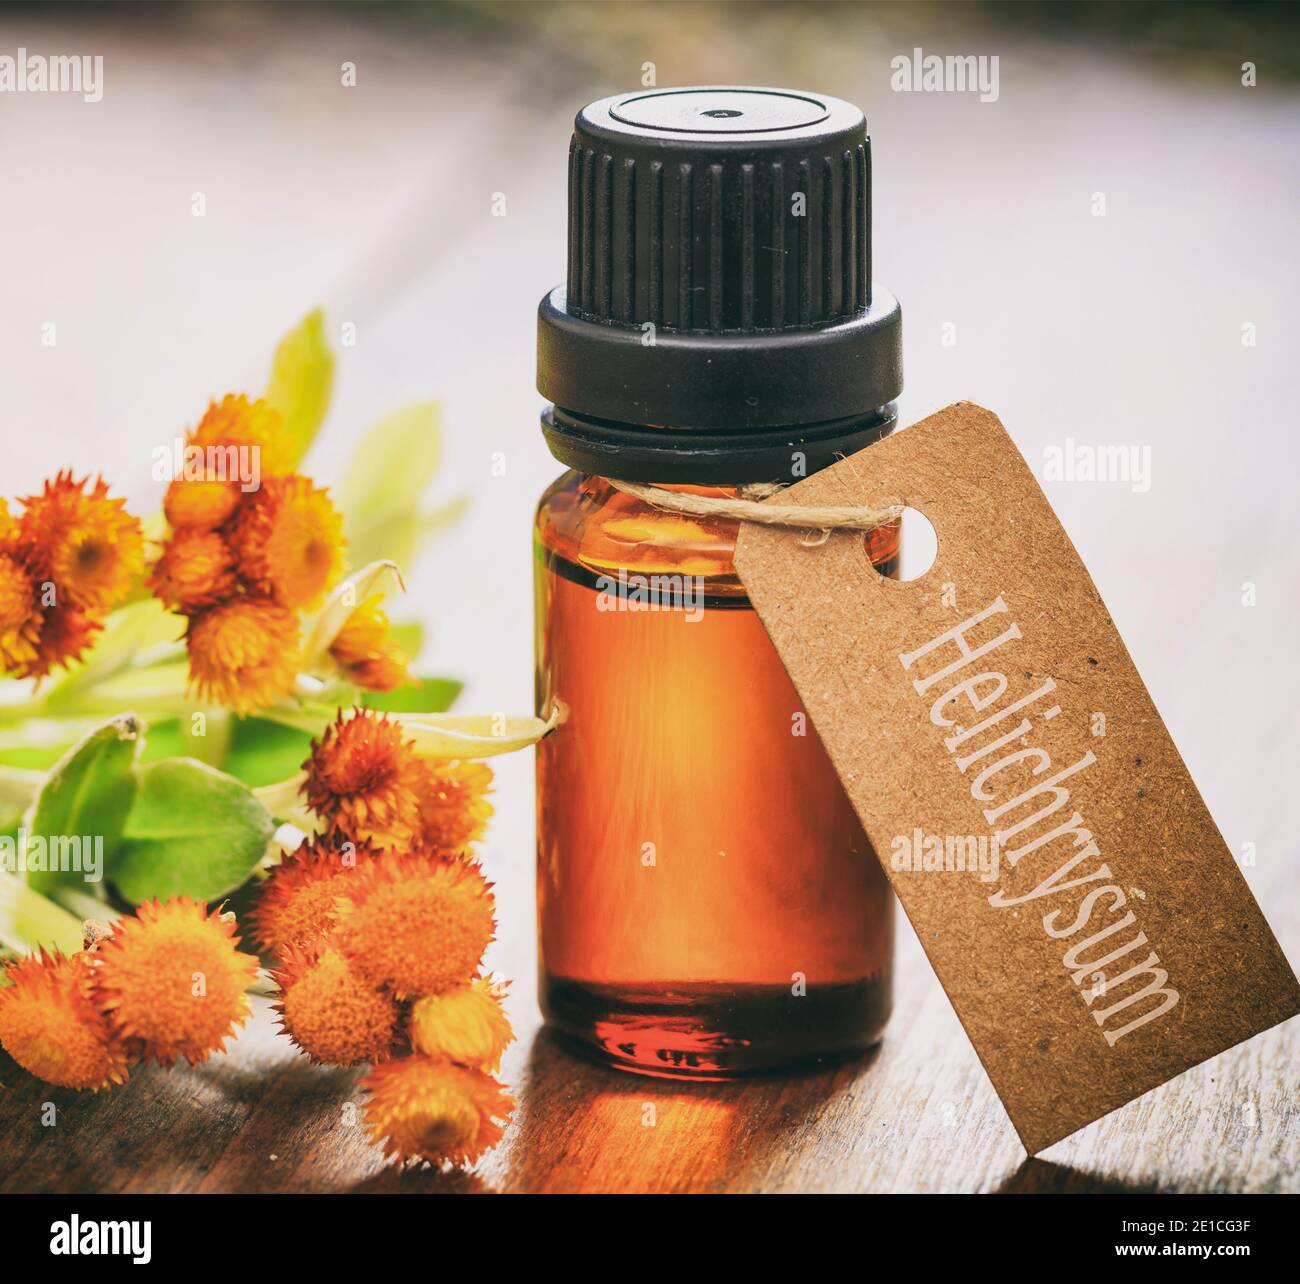 Helichrysum essential oil, fresh leaves and blossoms on wooden background. Helichrysum orientale herb, also known as everlasting and immortelle Stock Photo